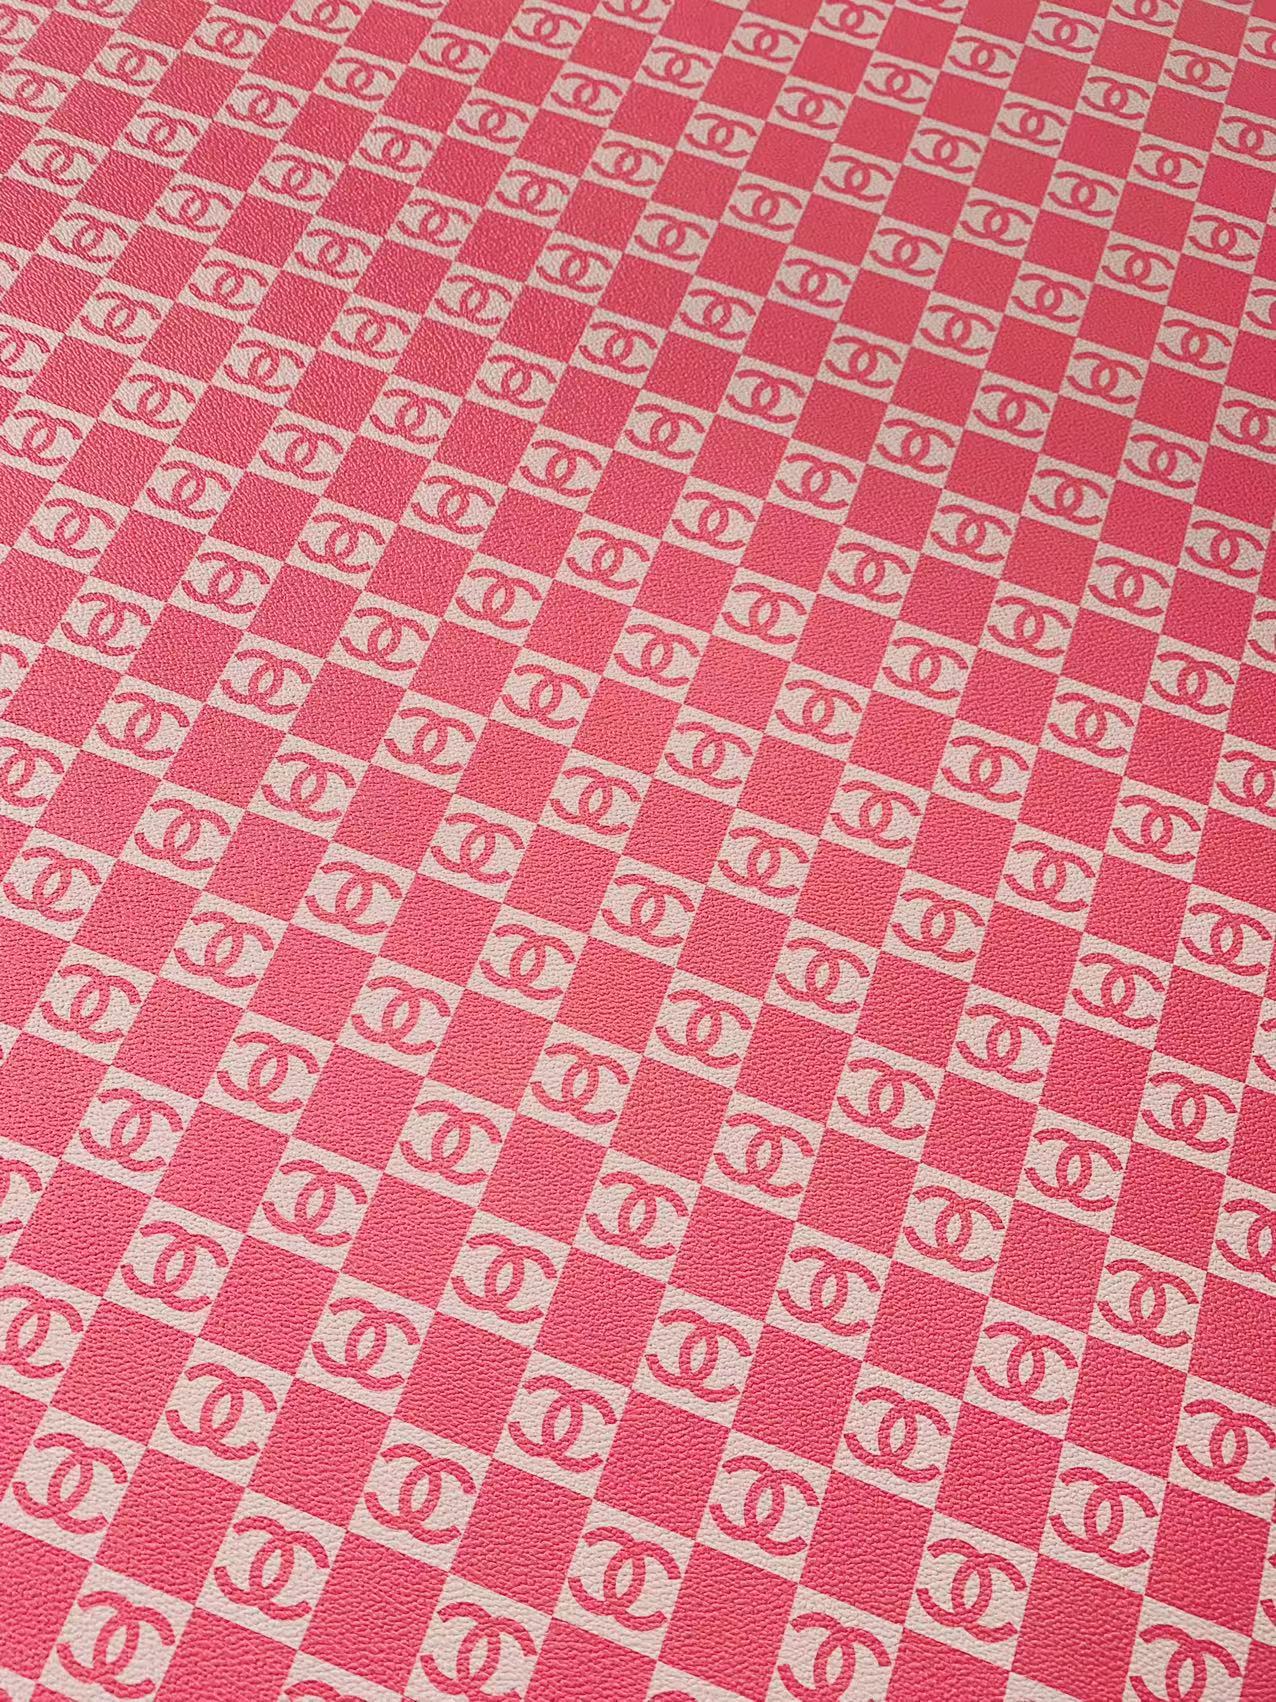 Fashion 1 inch Size Pink Chanel Design Leather Fabric For Handmade Han –  chaofabricstore